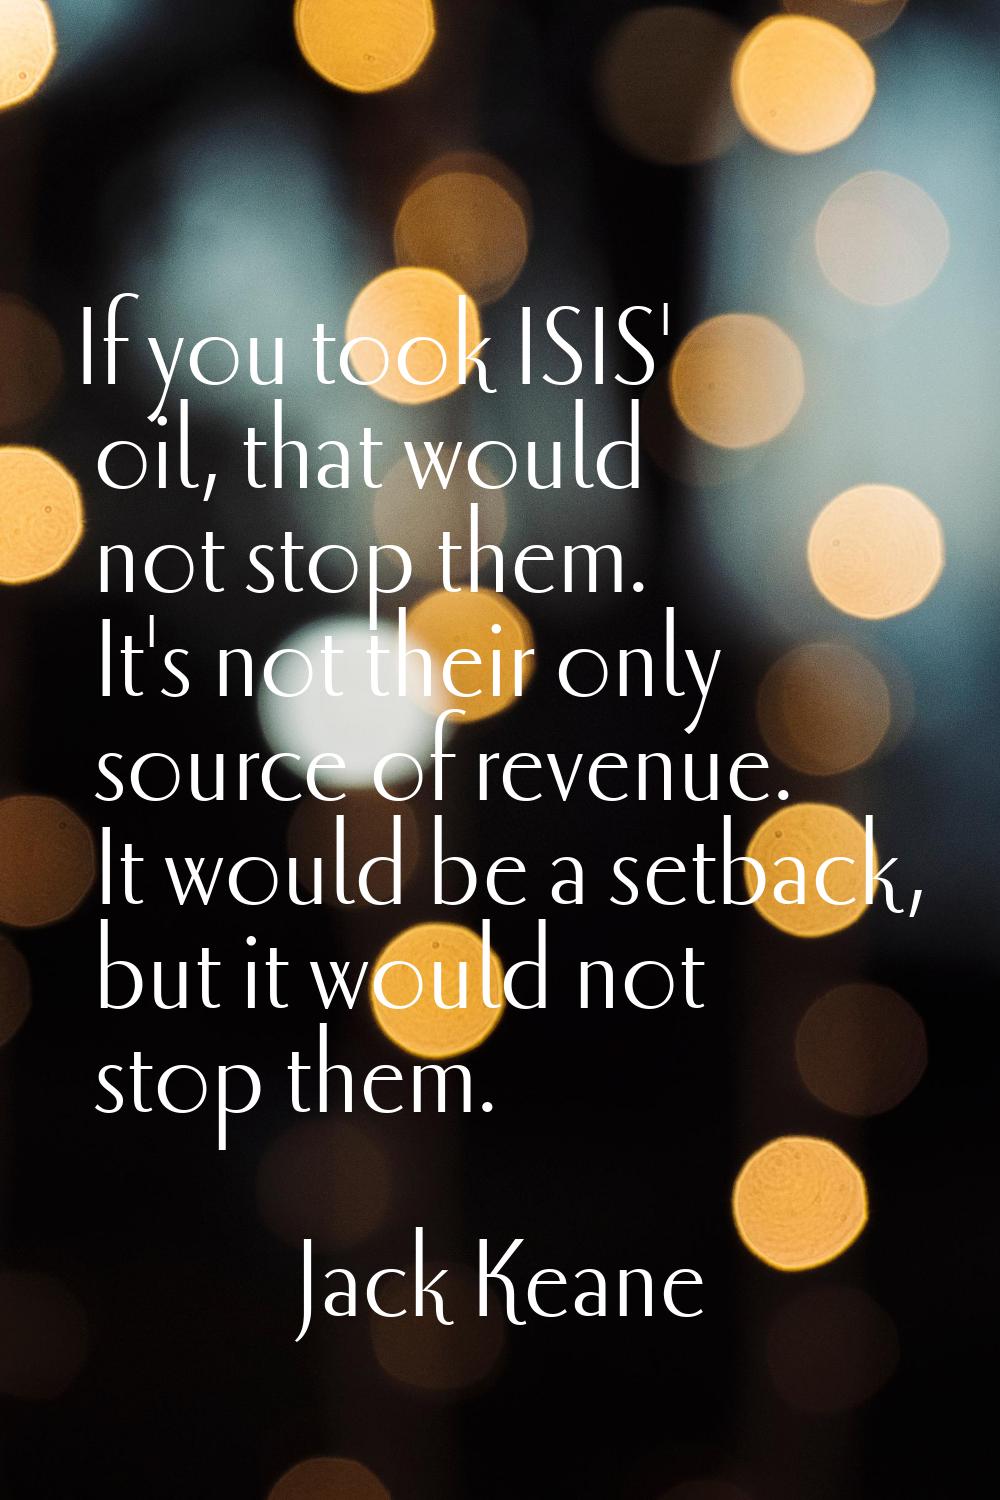 If you took ISIS' oil, that would not stop them. It's not their only source of revenue. It would be